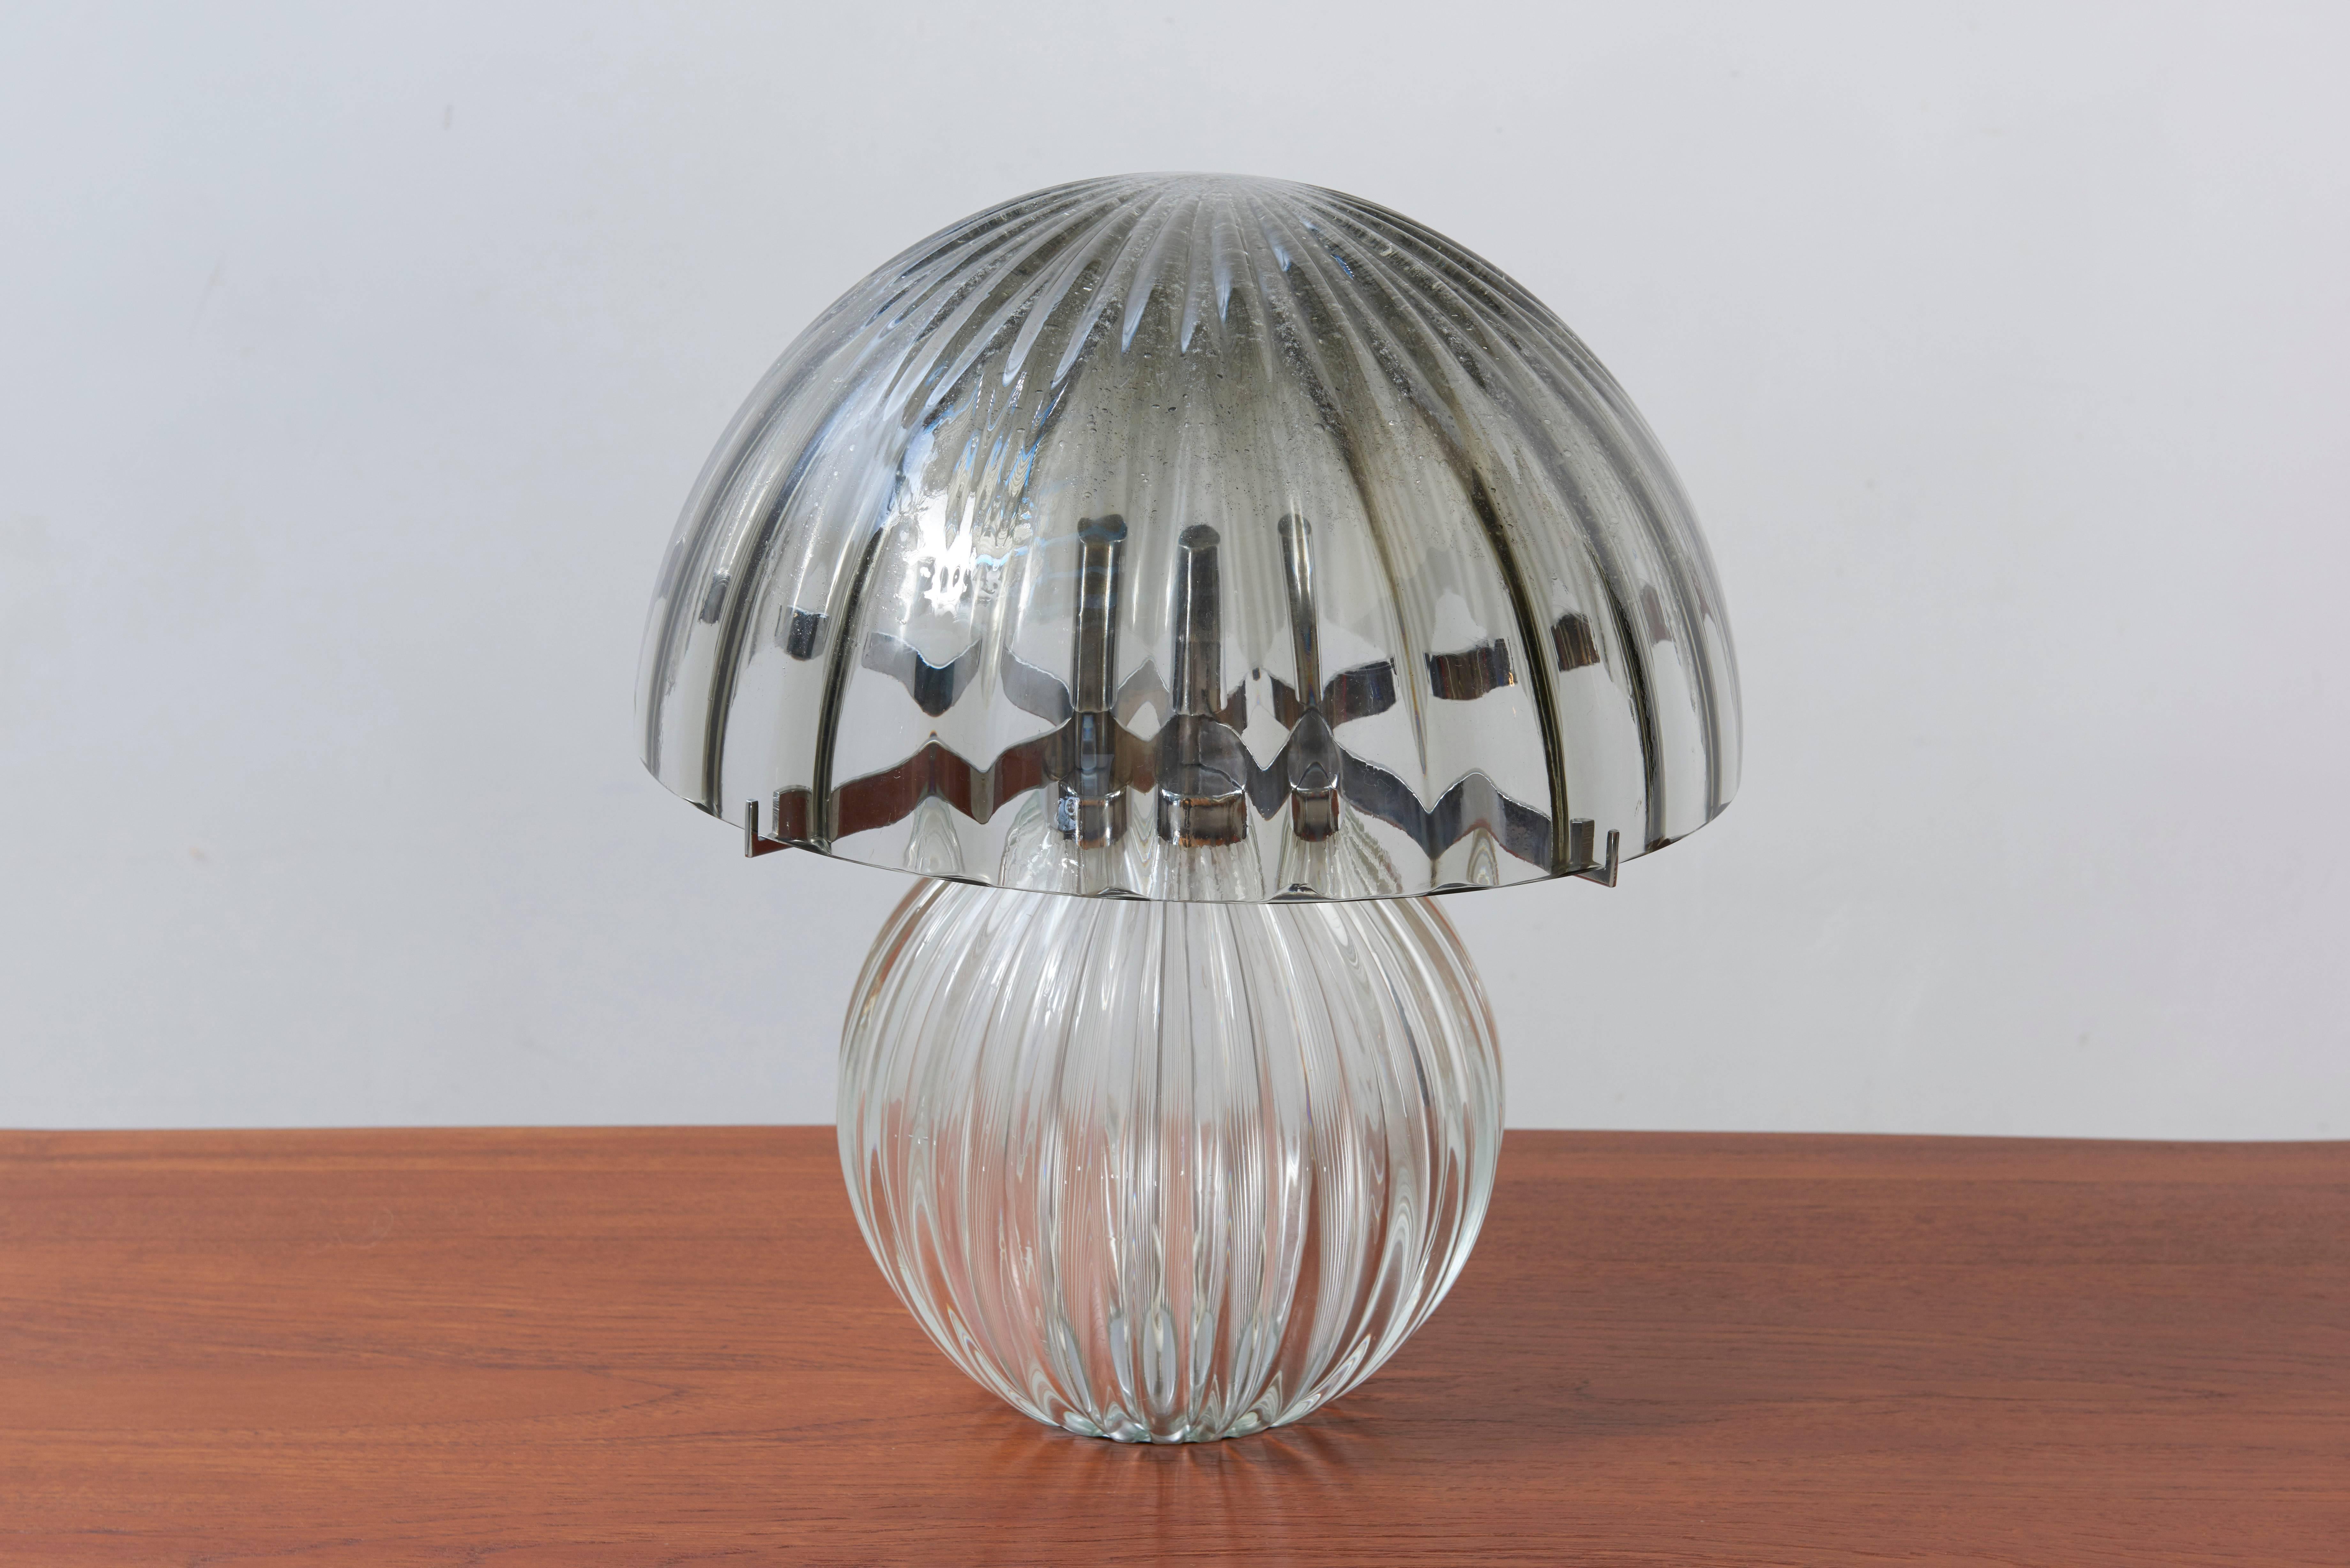 Excellent and rare mushroom table lamp in smoked glass by Murano glass Manufacture. 
The large handblown glass shade and body with their optical cast create a lovely light effect. 

The stylish and clean elegance of this lamp suits many